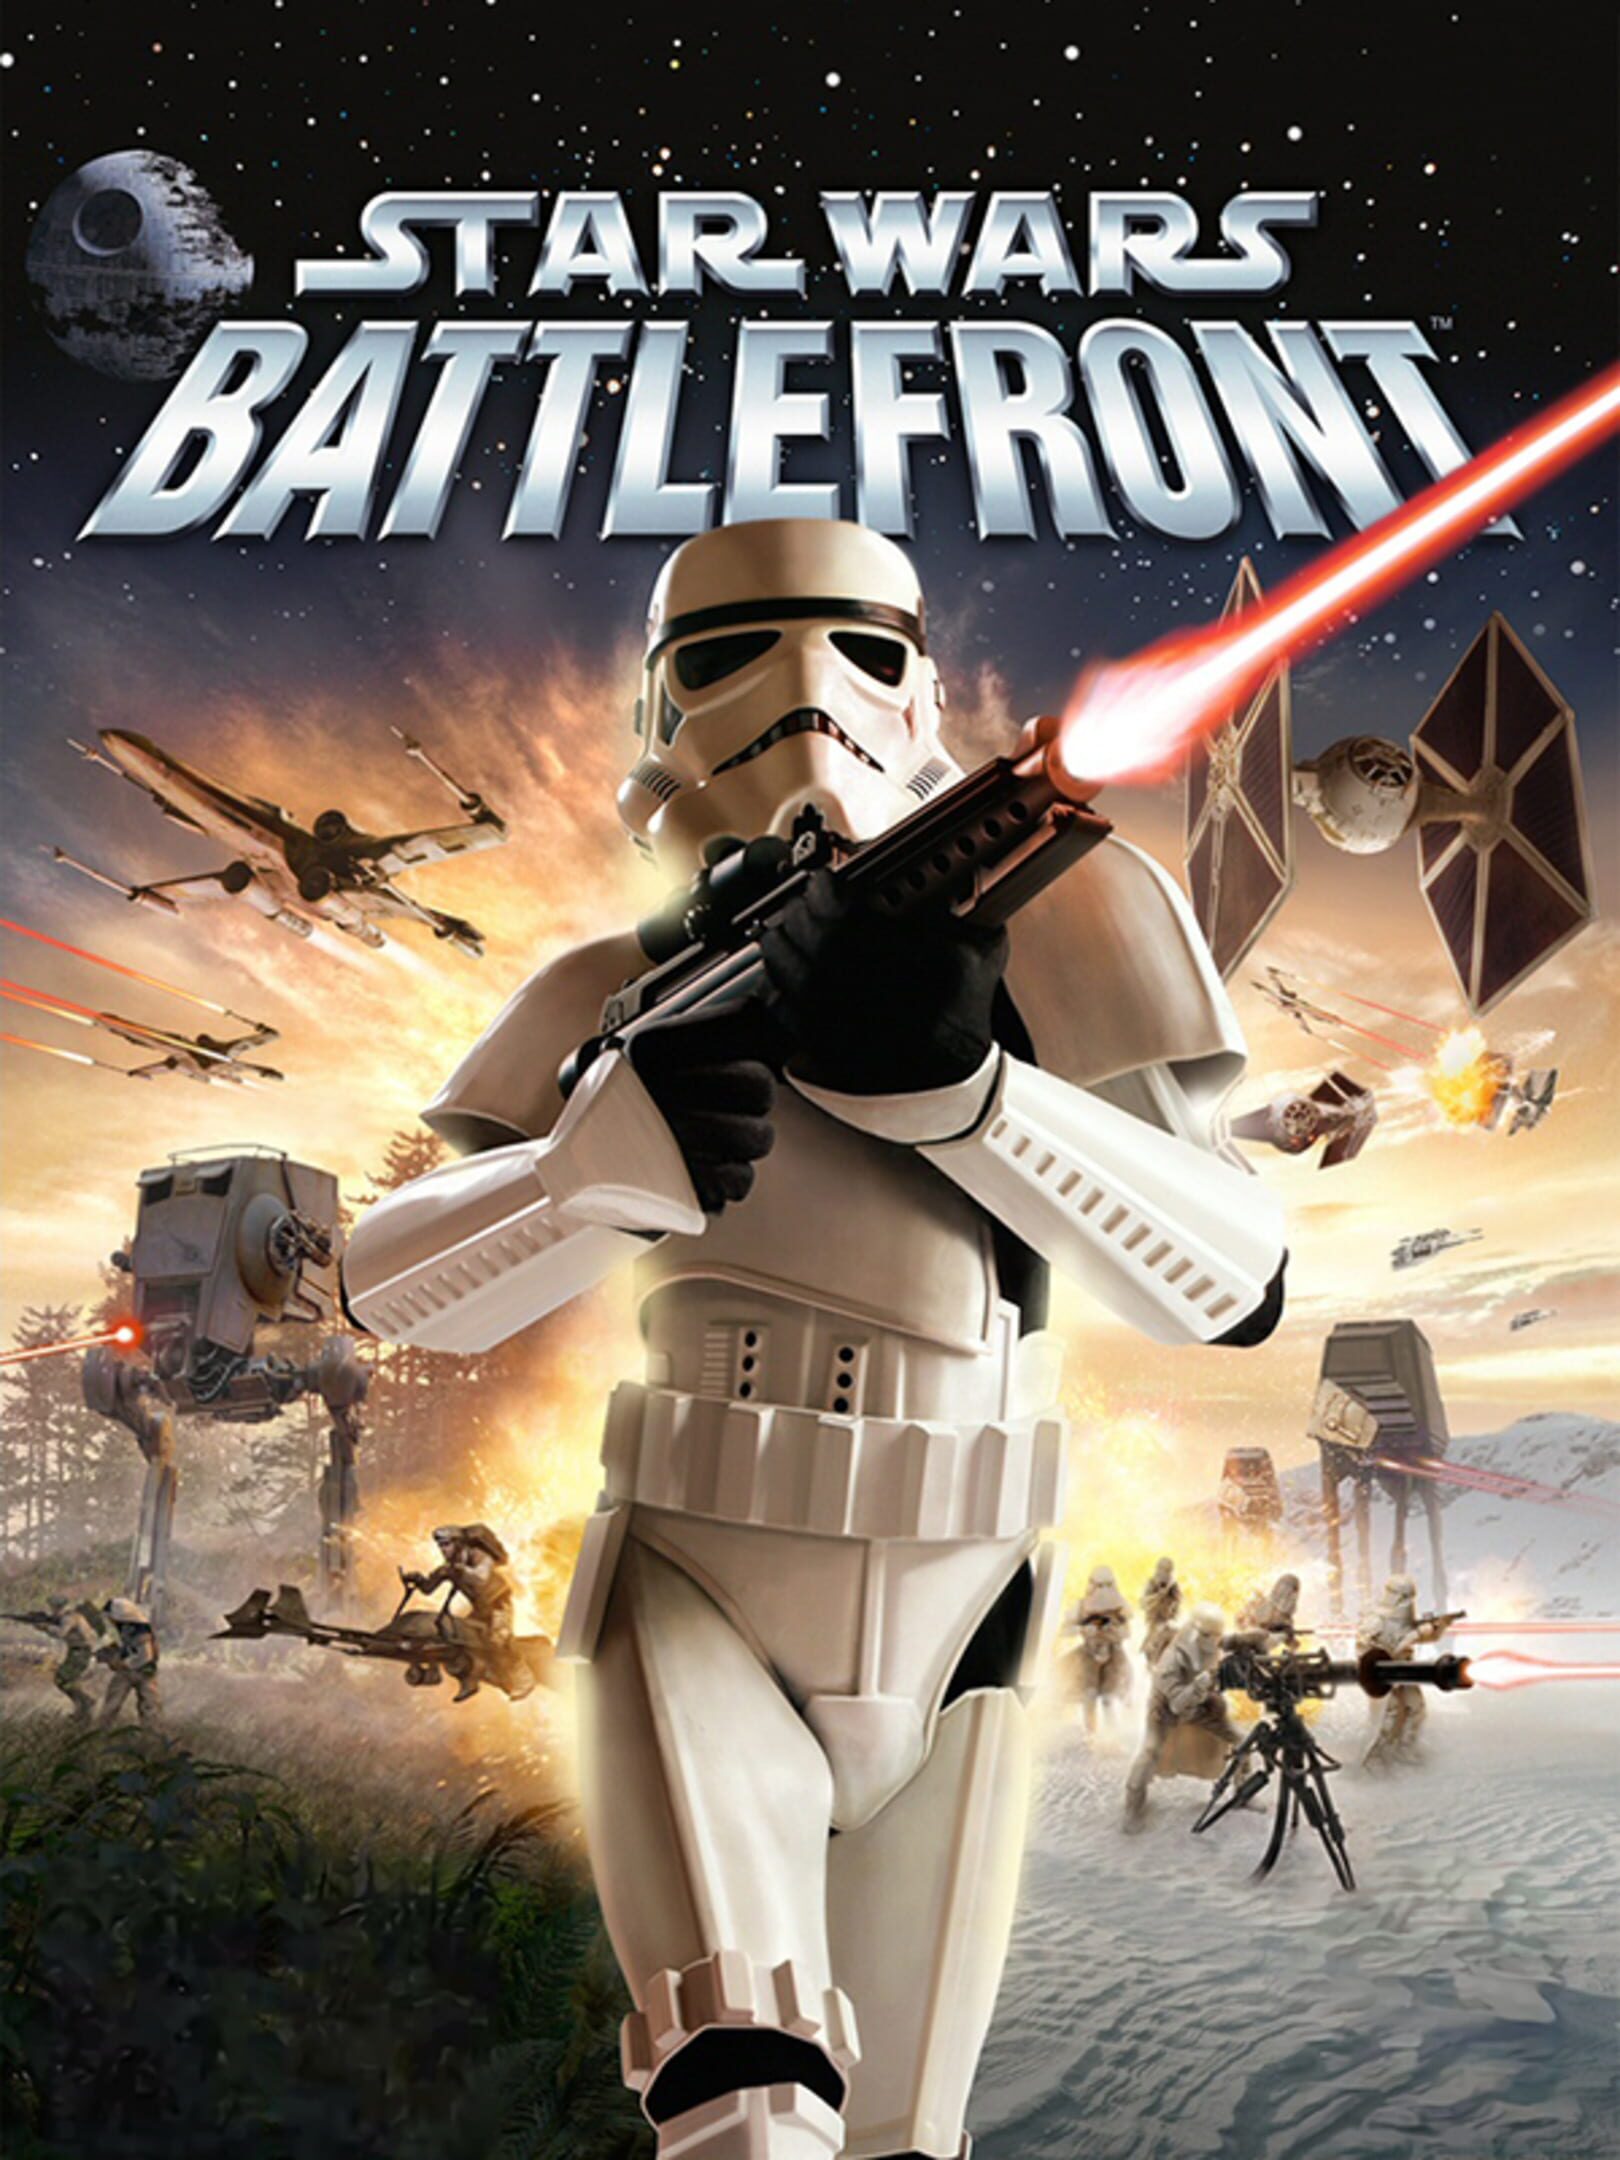 Star wars battlefront classic collection купить. Star Wars Battlefront (Classic, 2004). Star Wars Battlefront 2 игра. Star Wars Battlefront 2 2005 обложка. Батлфронт 2 диск.